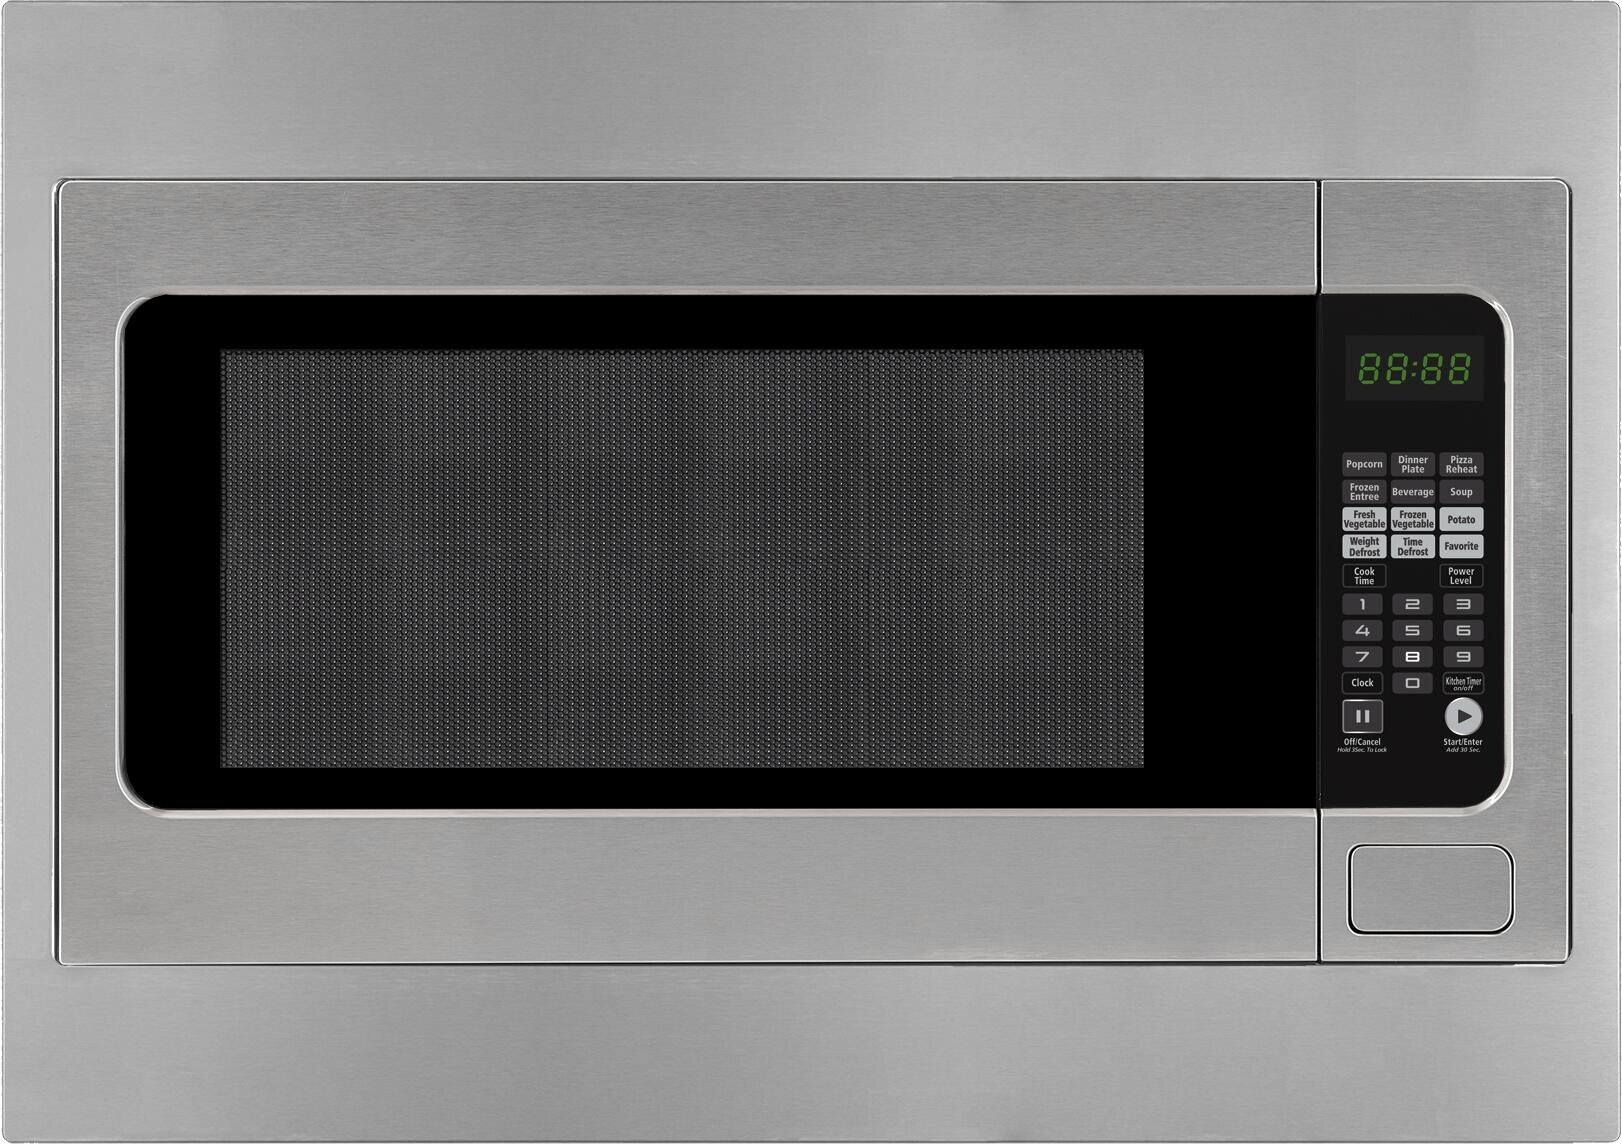 GE Profile 24 in. 1.1 cu.ft Countertop Microwave with 10 Power